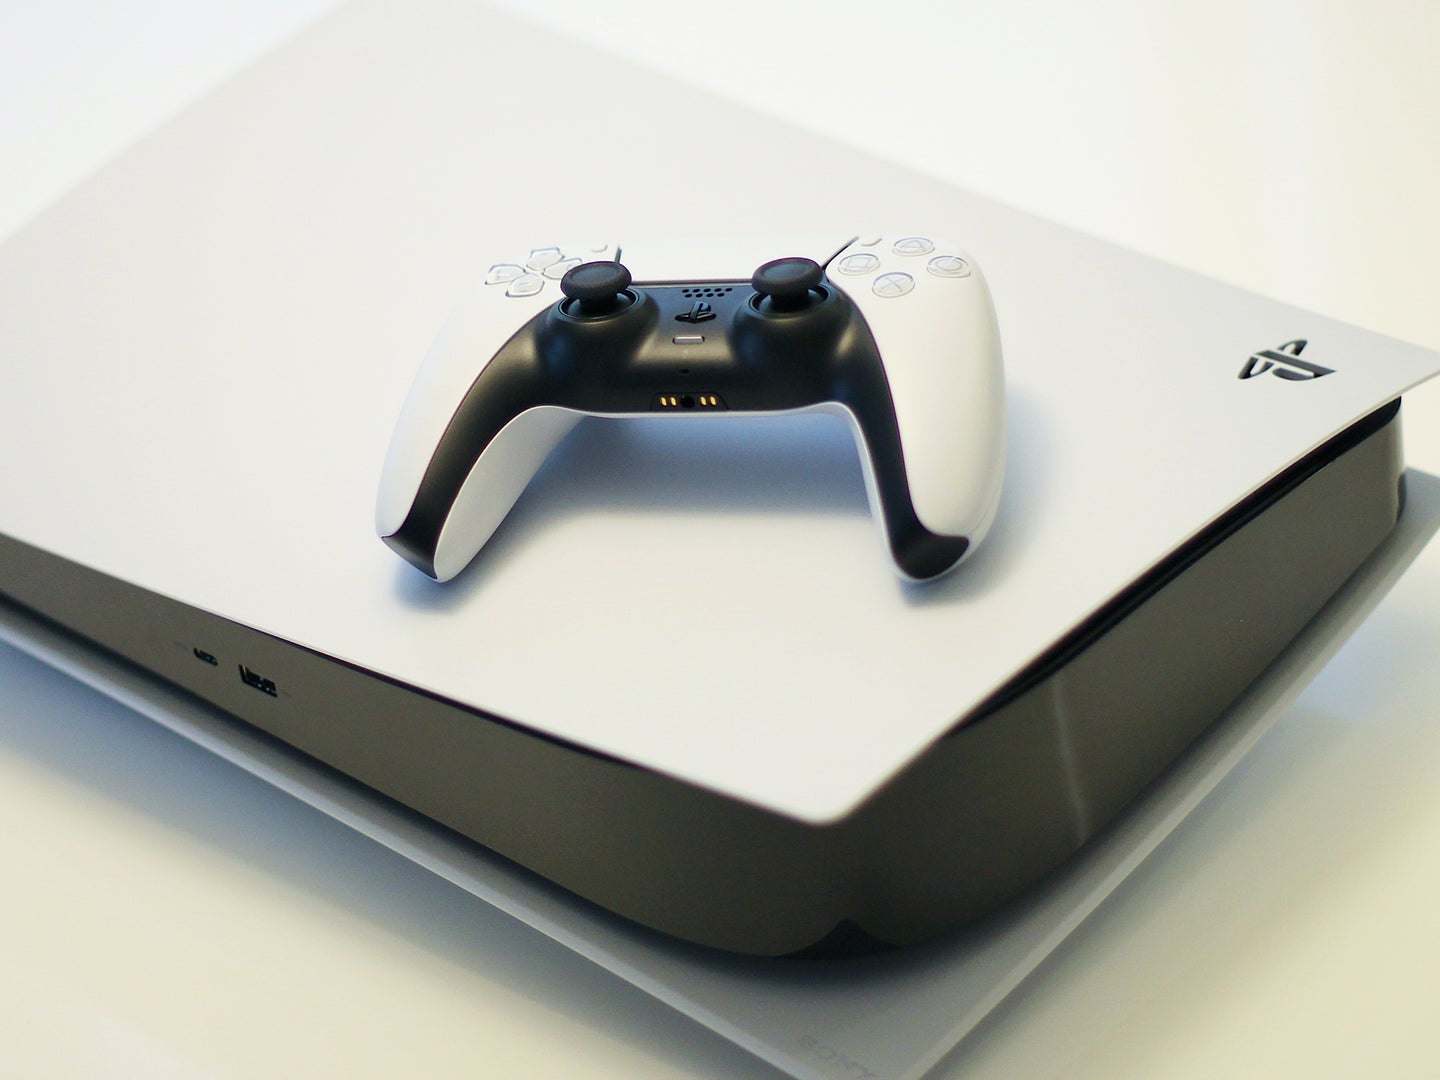 A white-and-black PlayStation 5 controller on top of a white-and-black PS5.